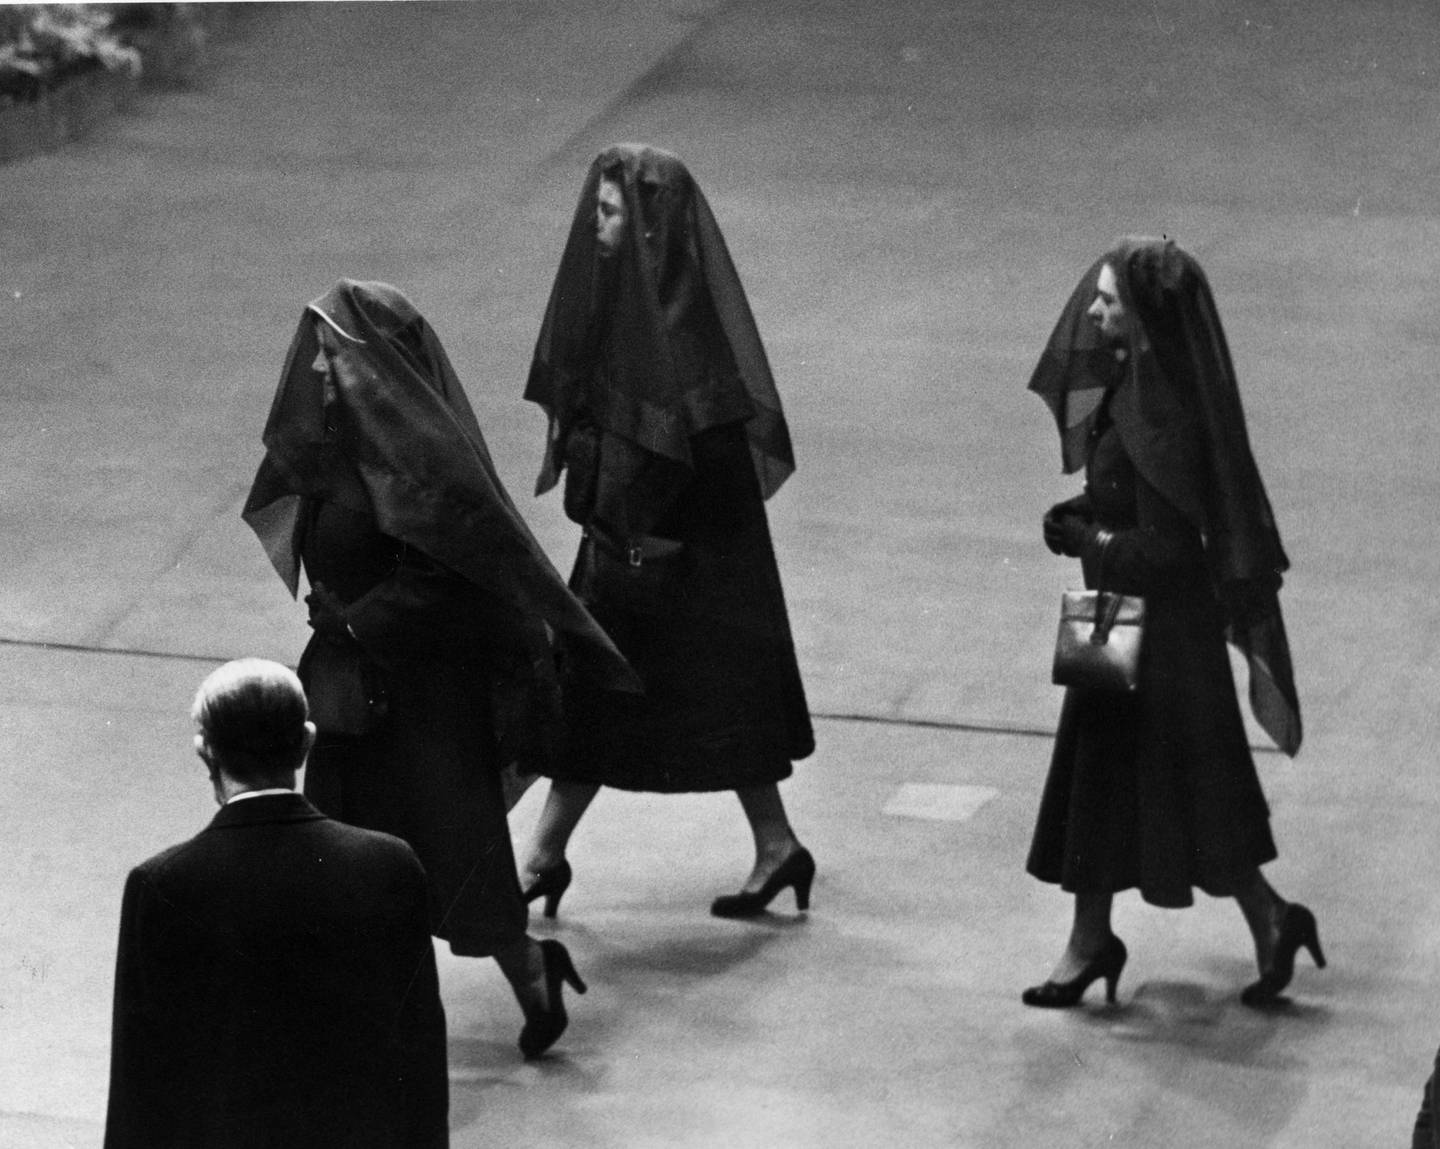 Queen Elizabeth II, the Queen Mother and Princess Margaret wear veils at the funeral of King George VI.